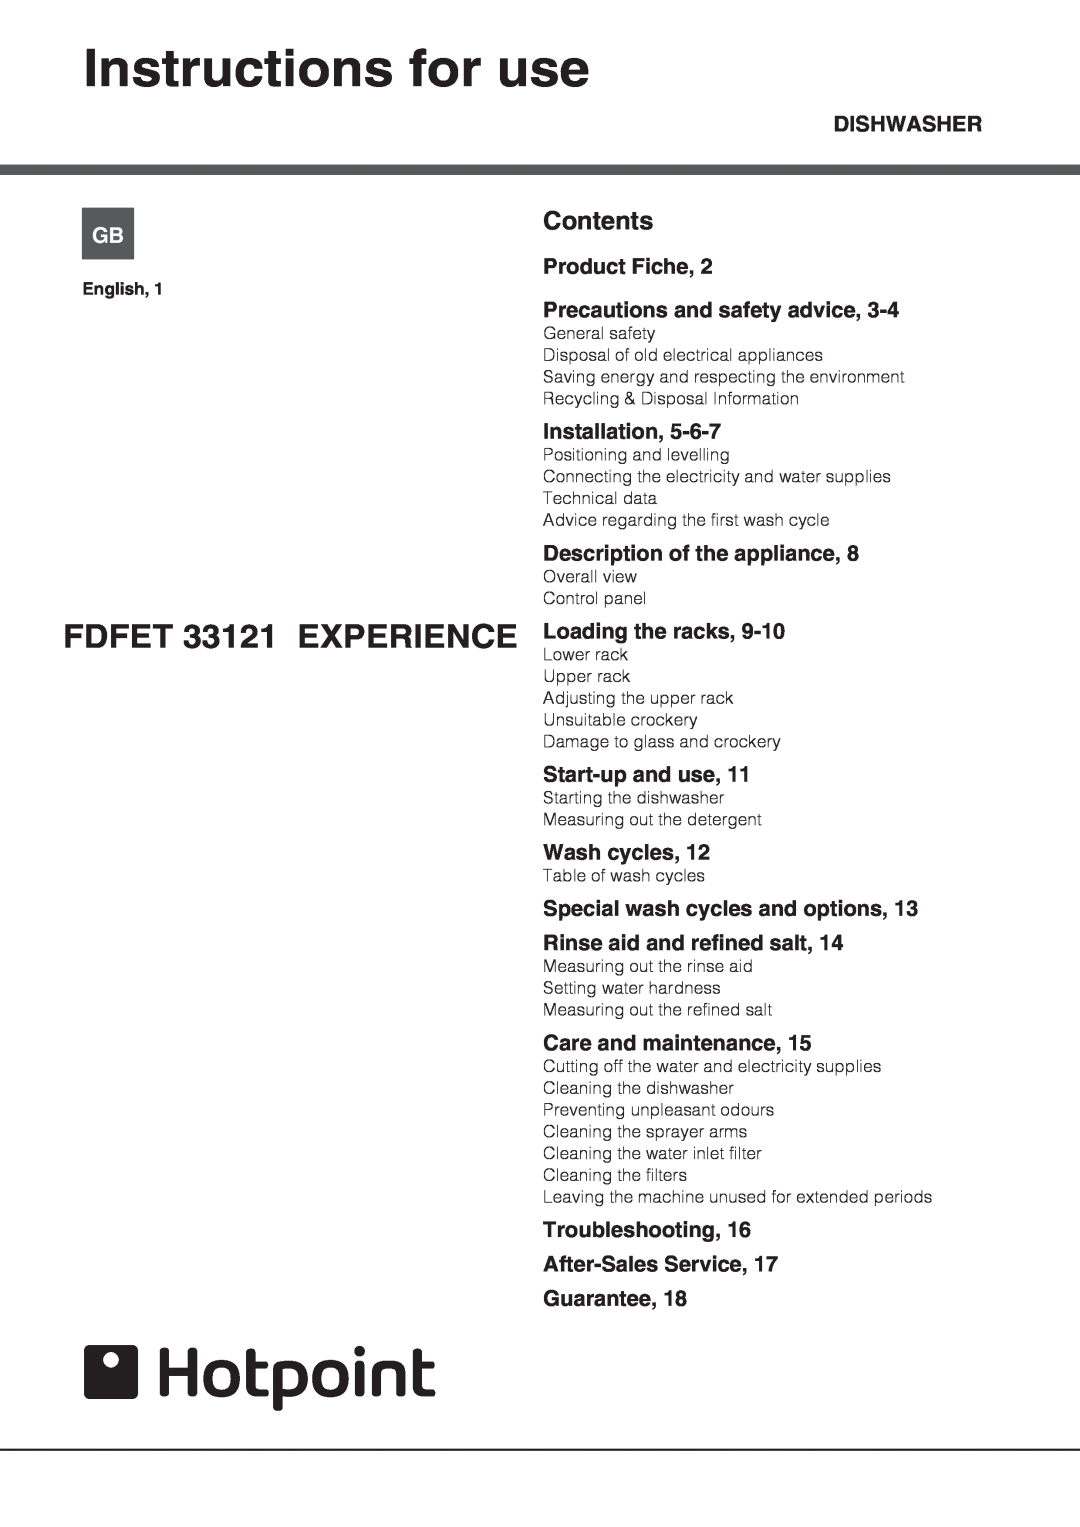 Hotpoint manual Instructions for use, FDFET 33121 EXPERIENCE, Contents 